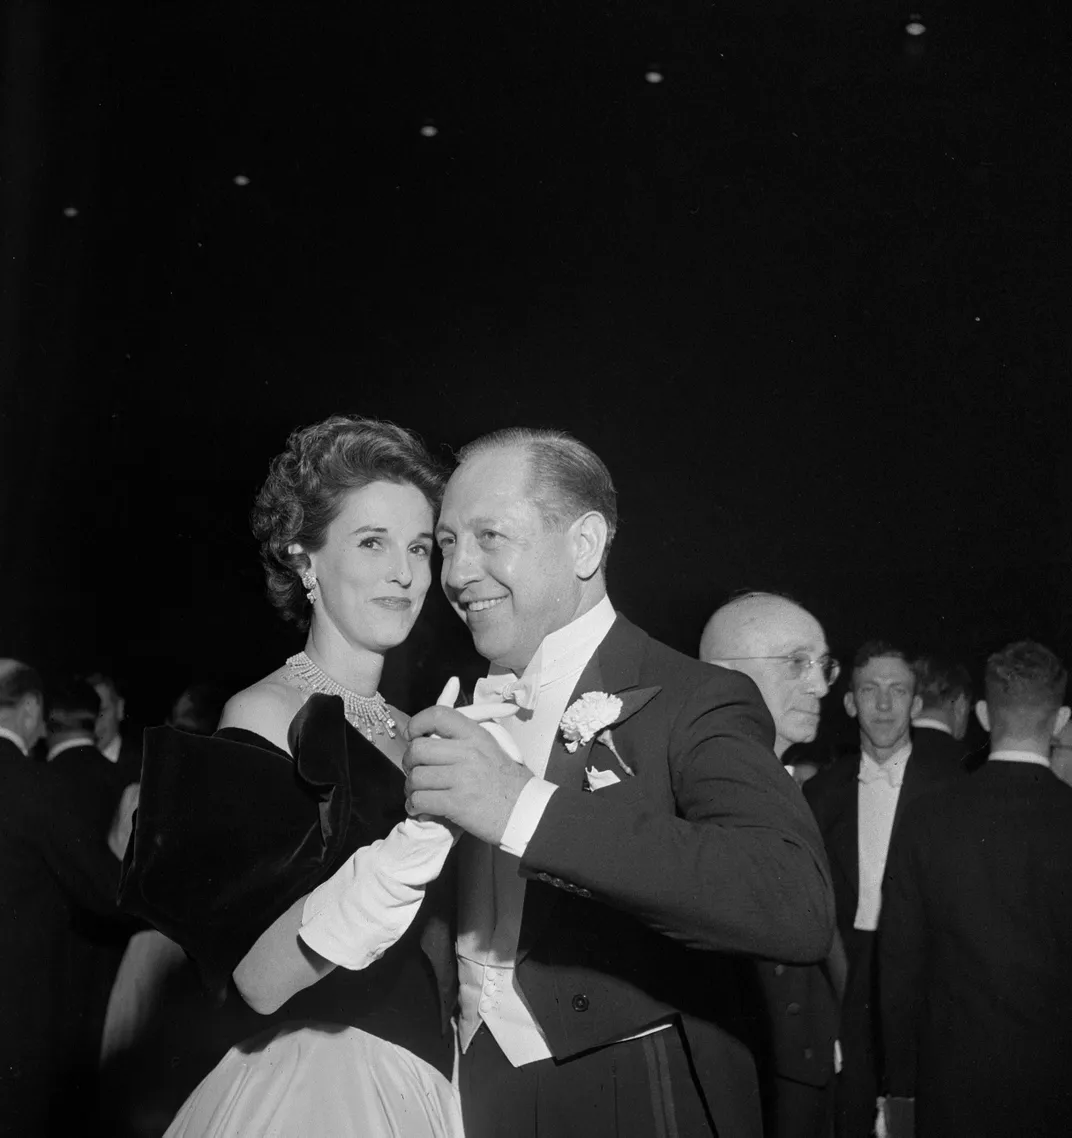 Babe Paley and her second husband, William Paley, at Dwight D. Eisenhower's Inaugural Ball on January 20, 1953